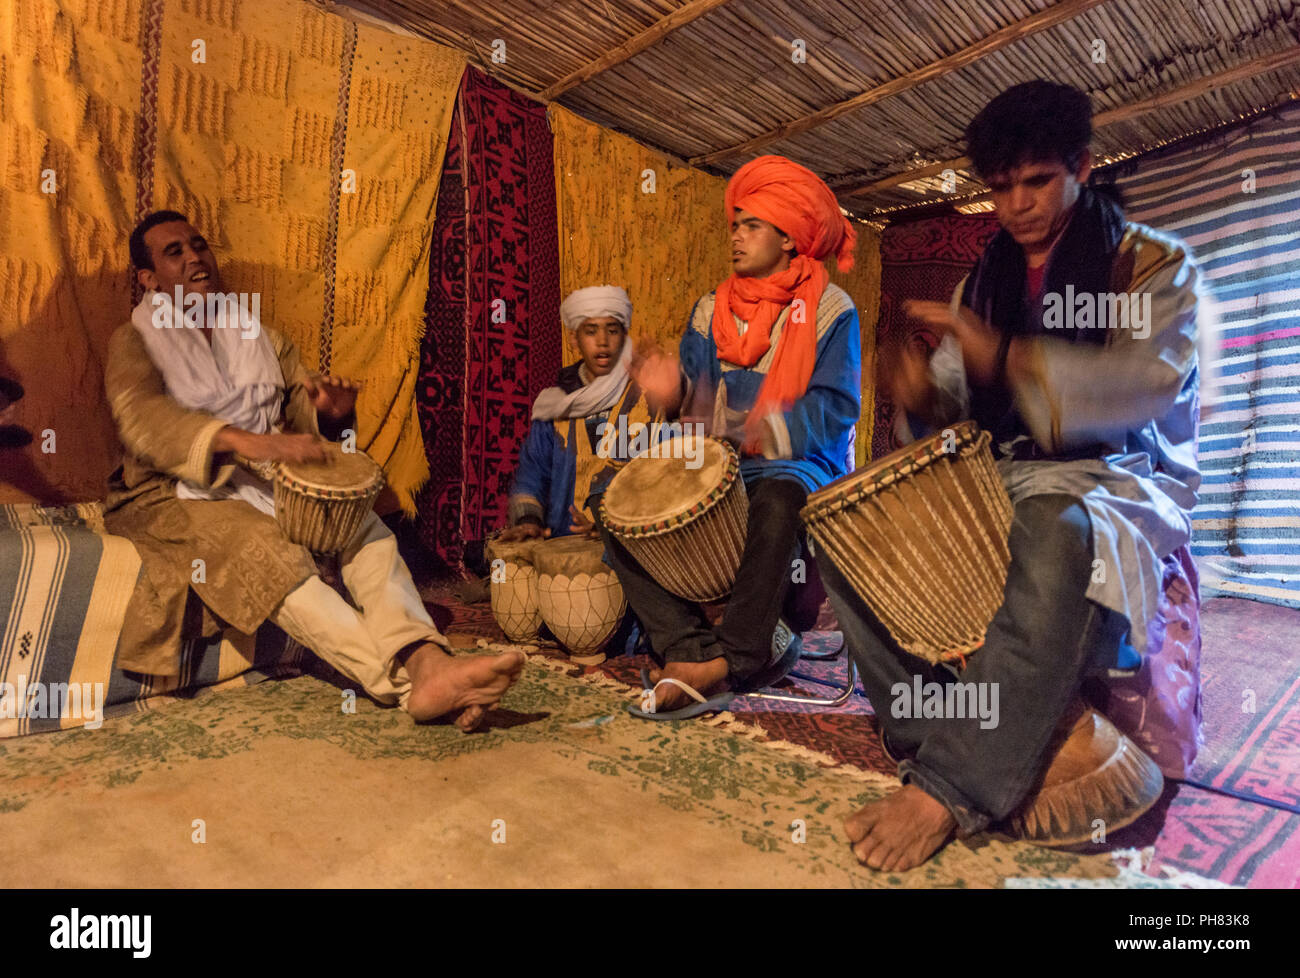 Bedouins with traditional clothes play on drums in a tent, Erg Chebbi, Merzouga, Sahara, Morocco Stock Photo